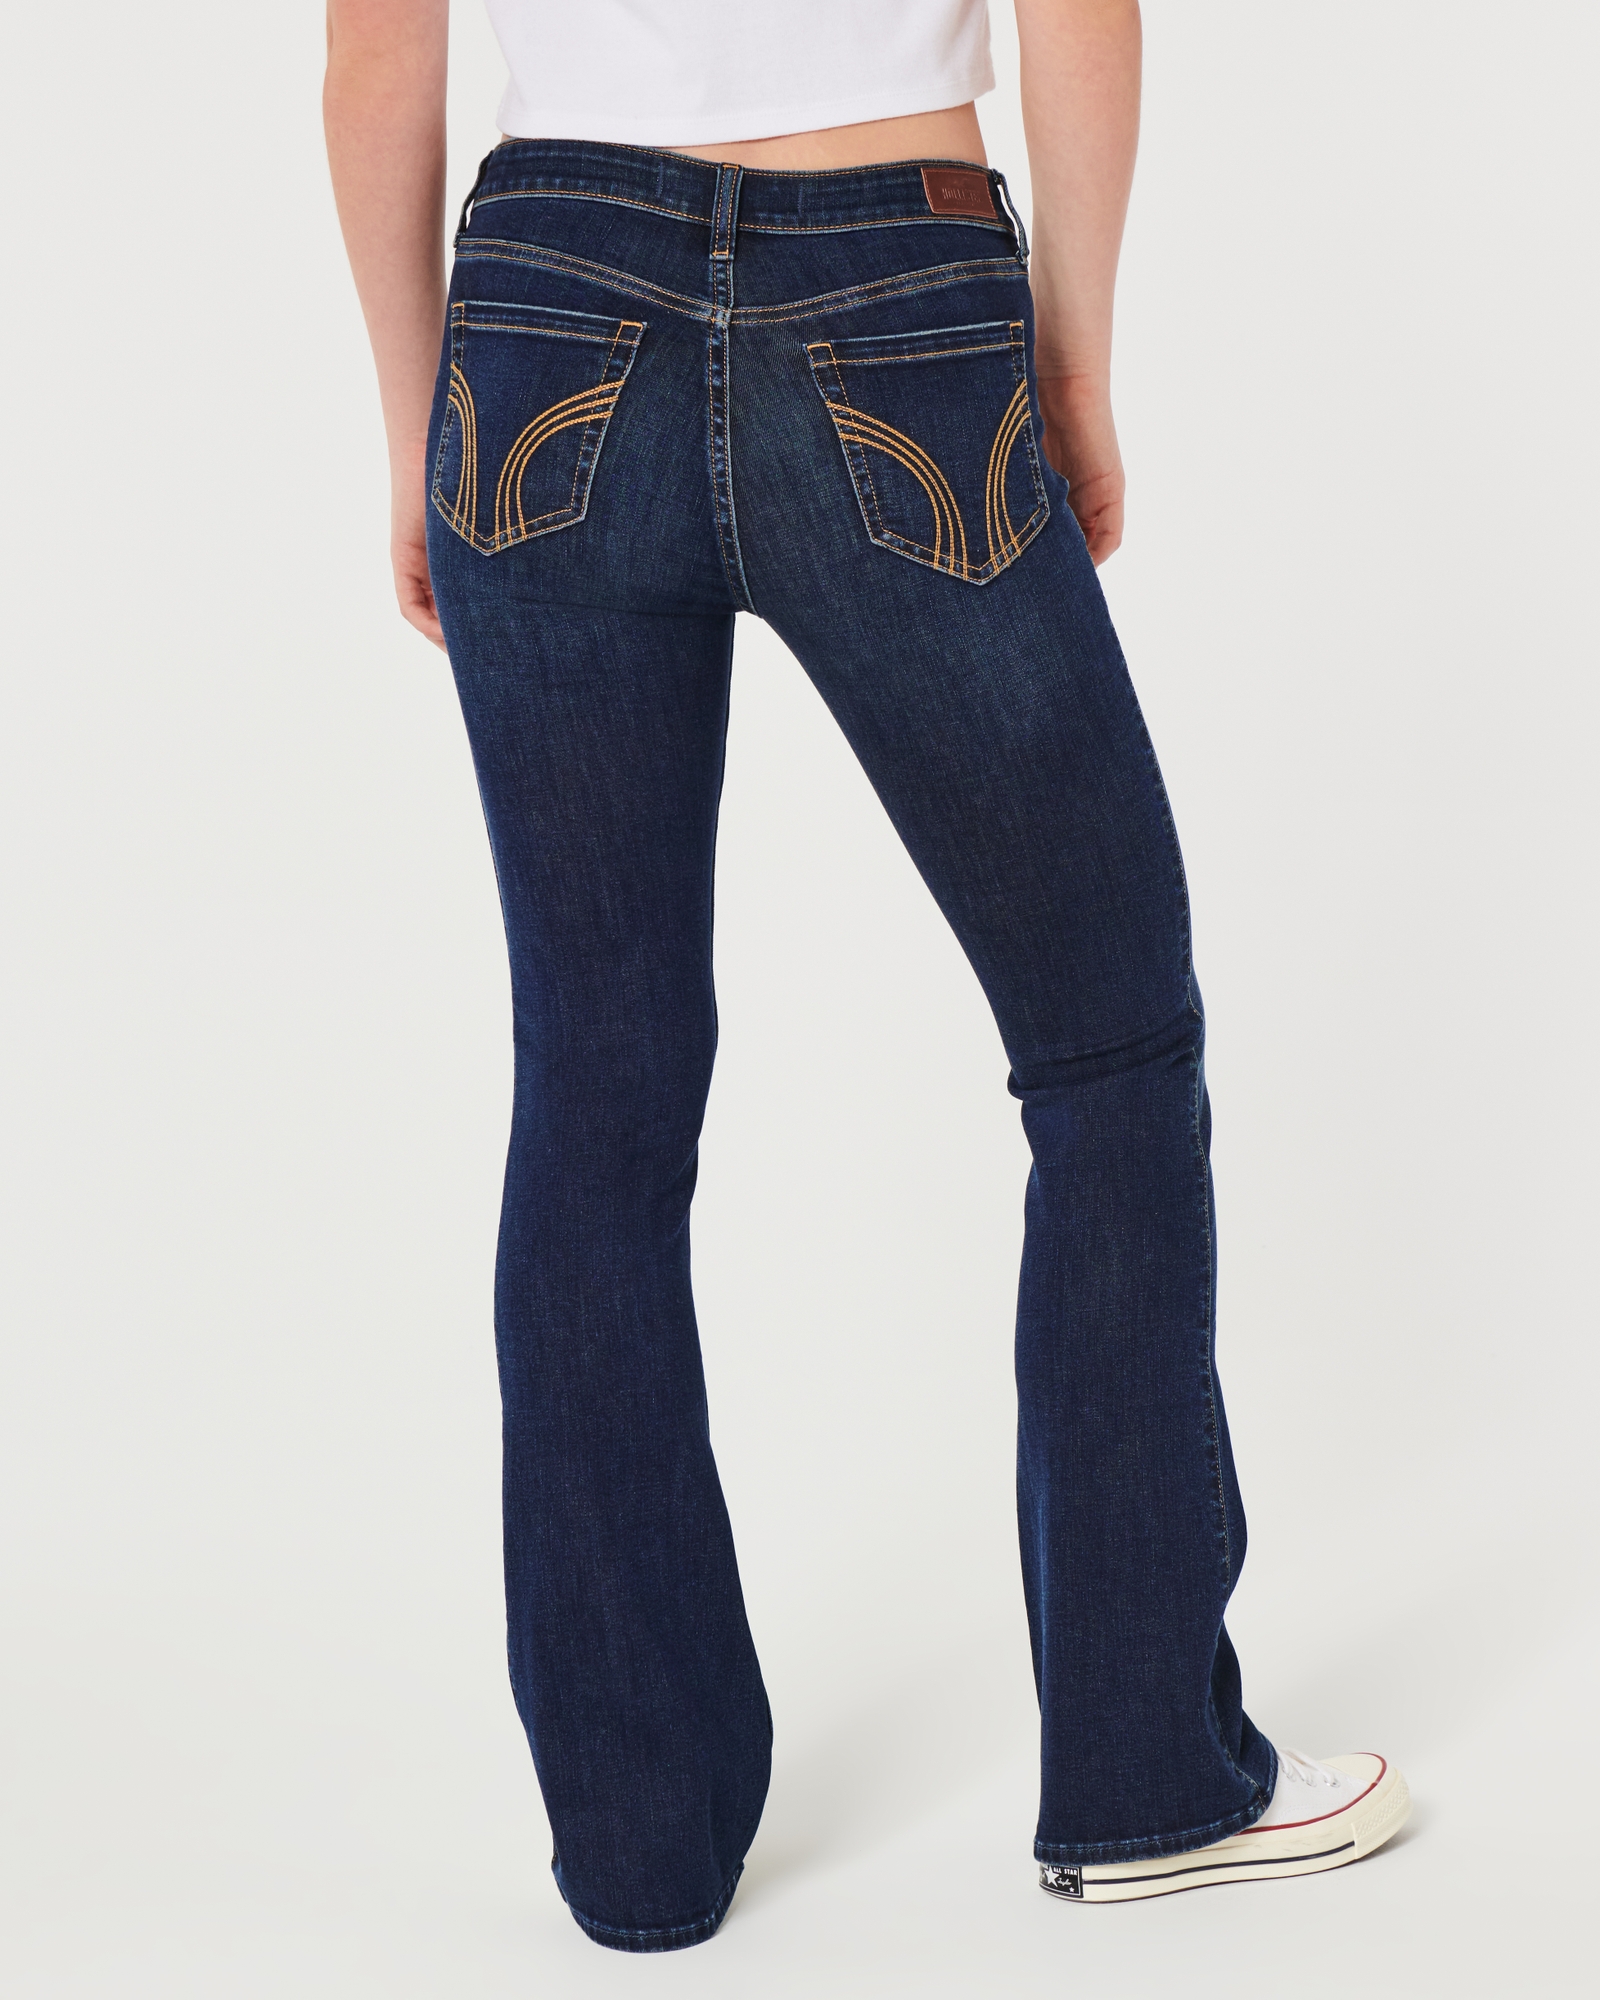 Hollister straight leg jeans in mid wash - ShopStyle